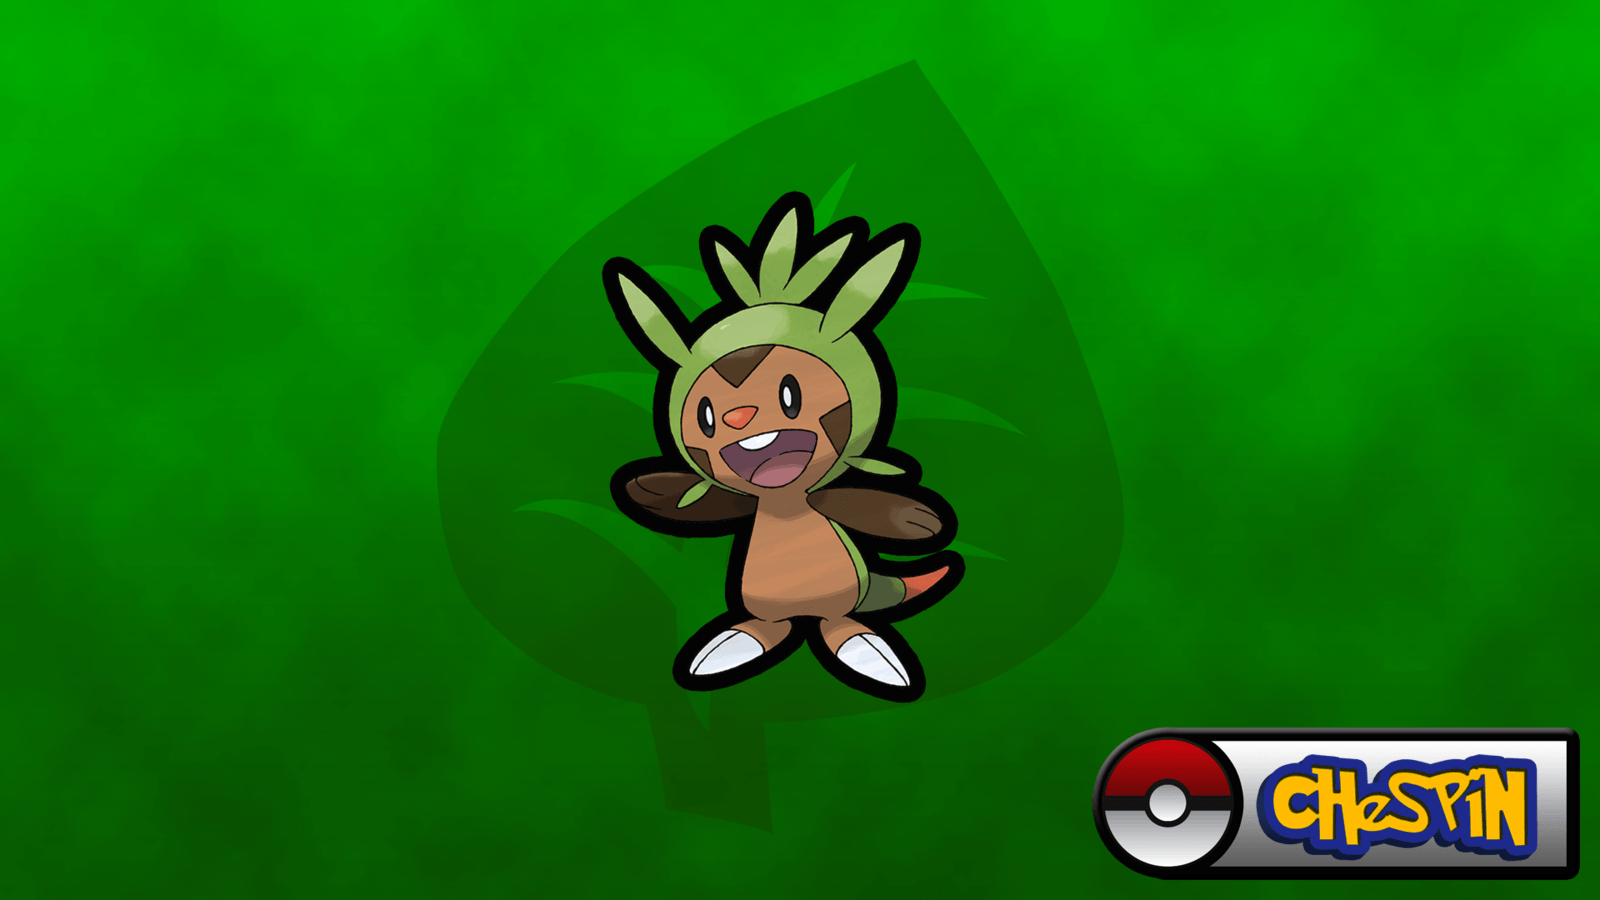 Image Gallery of Pokemon Chespin Wallpaper